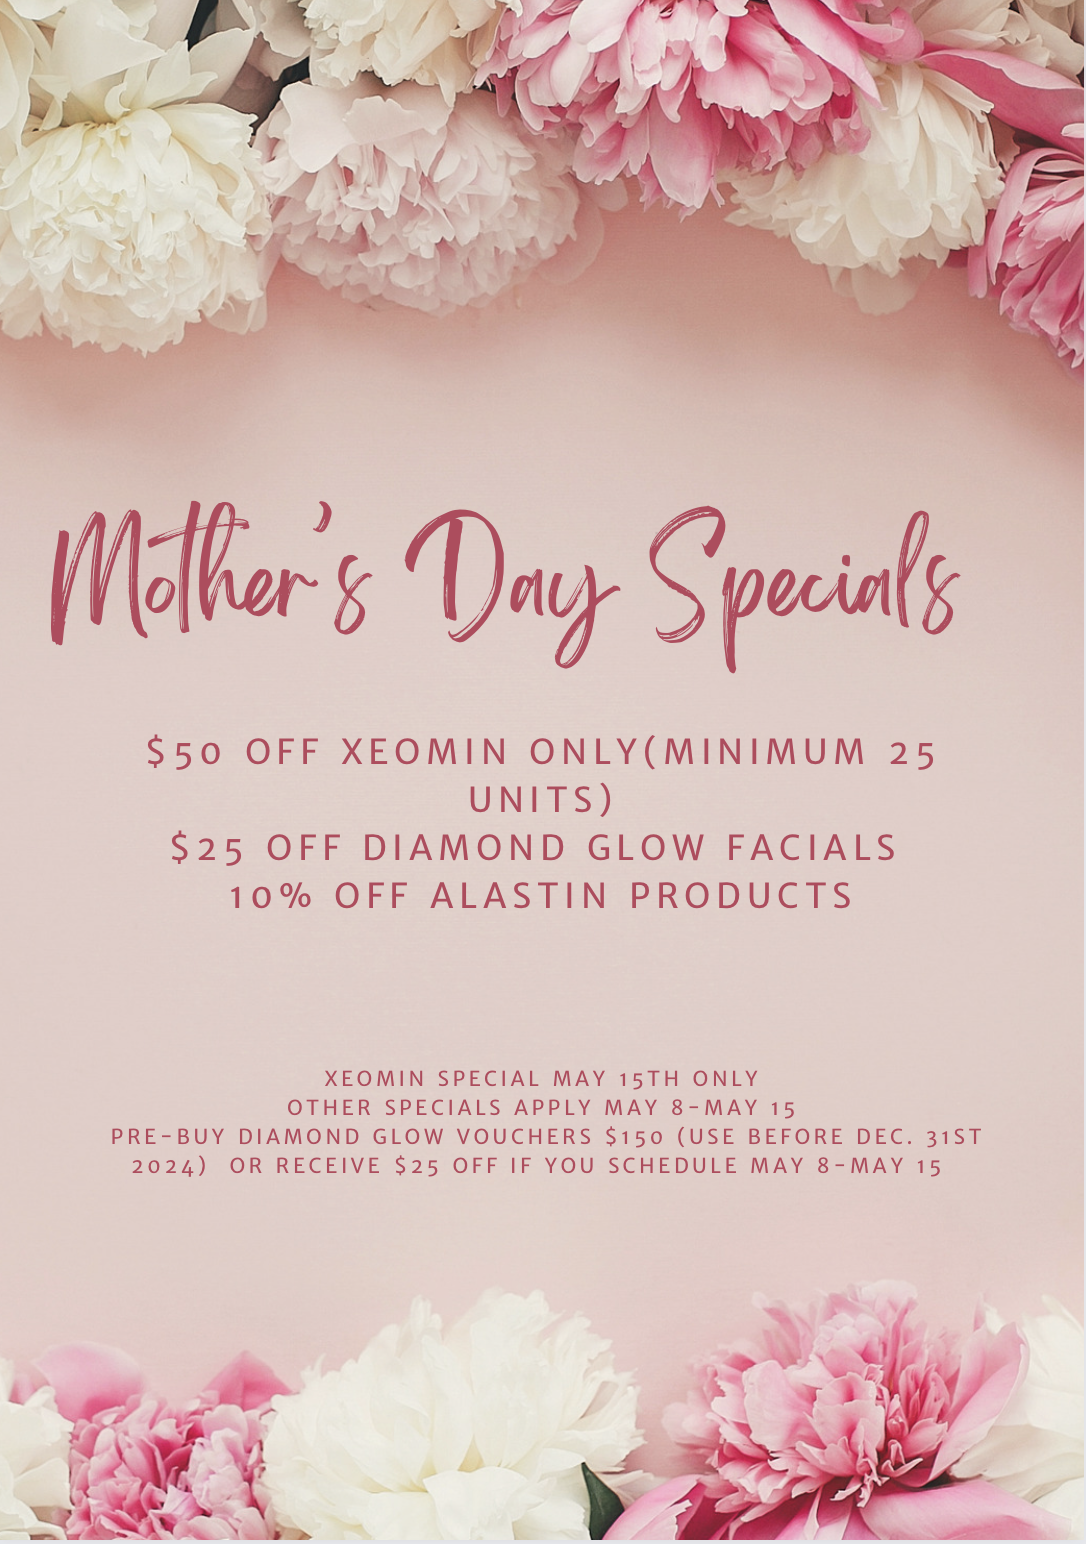 Mother's Day Specials at DermUtopia